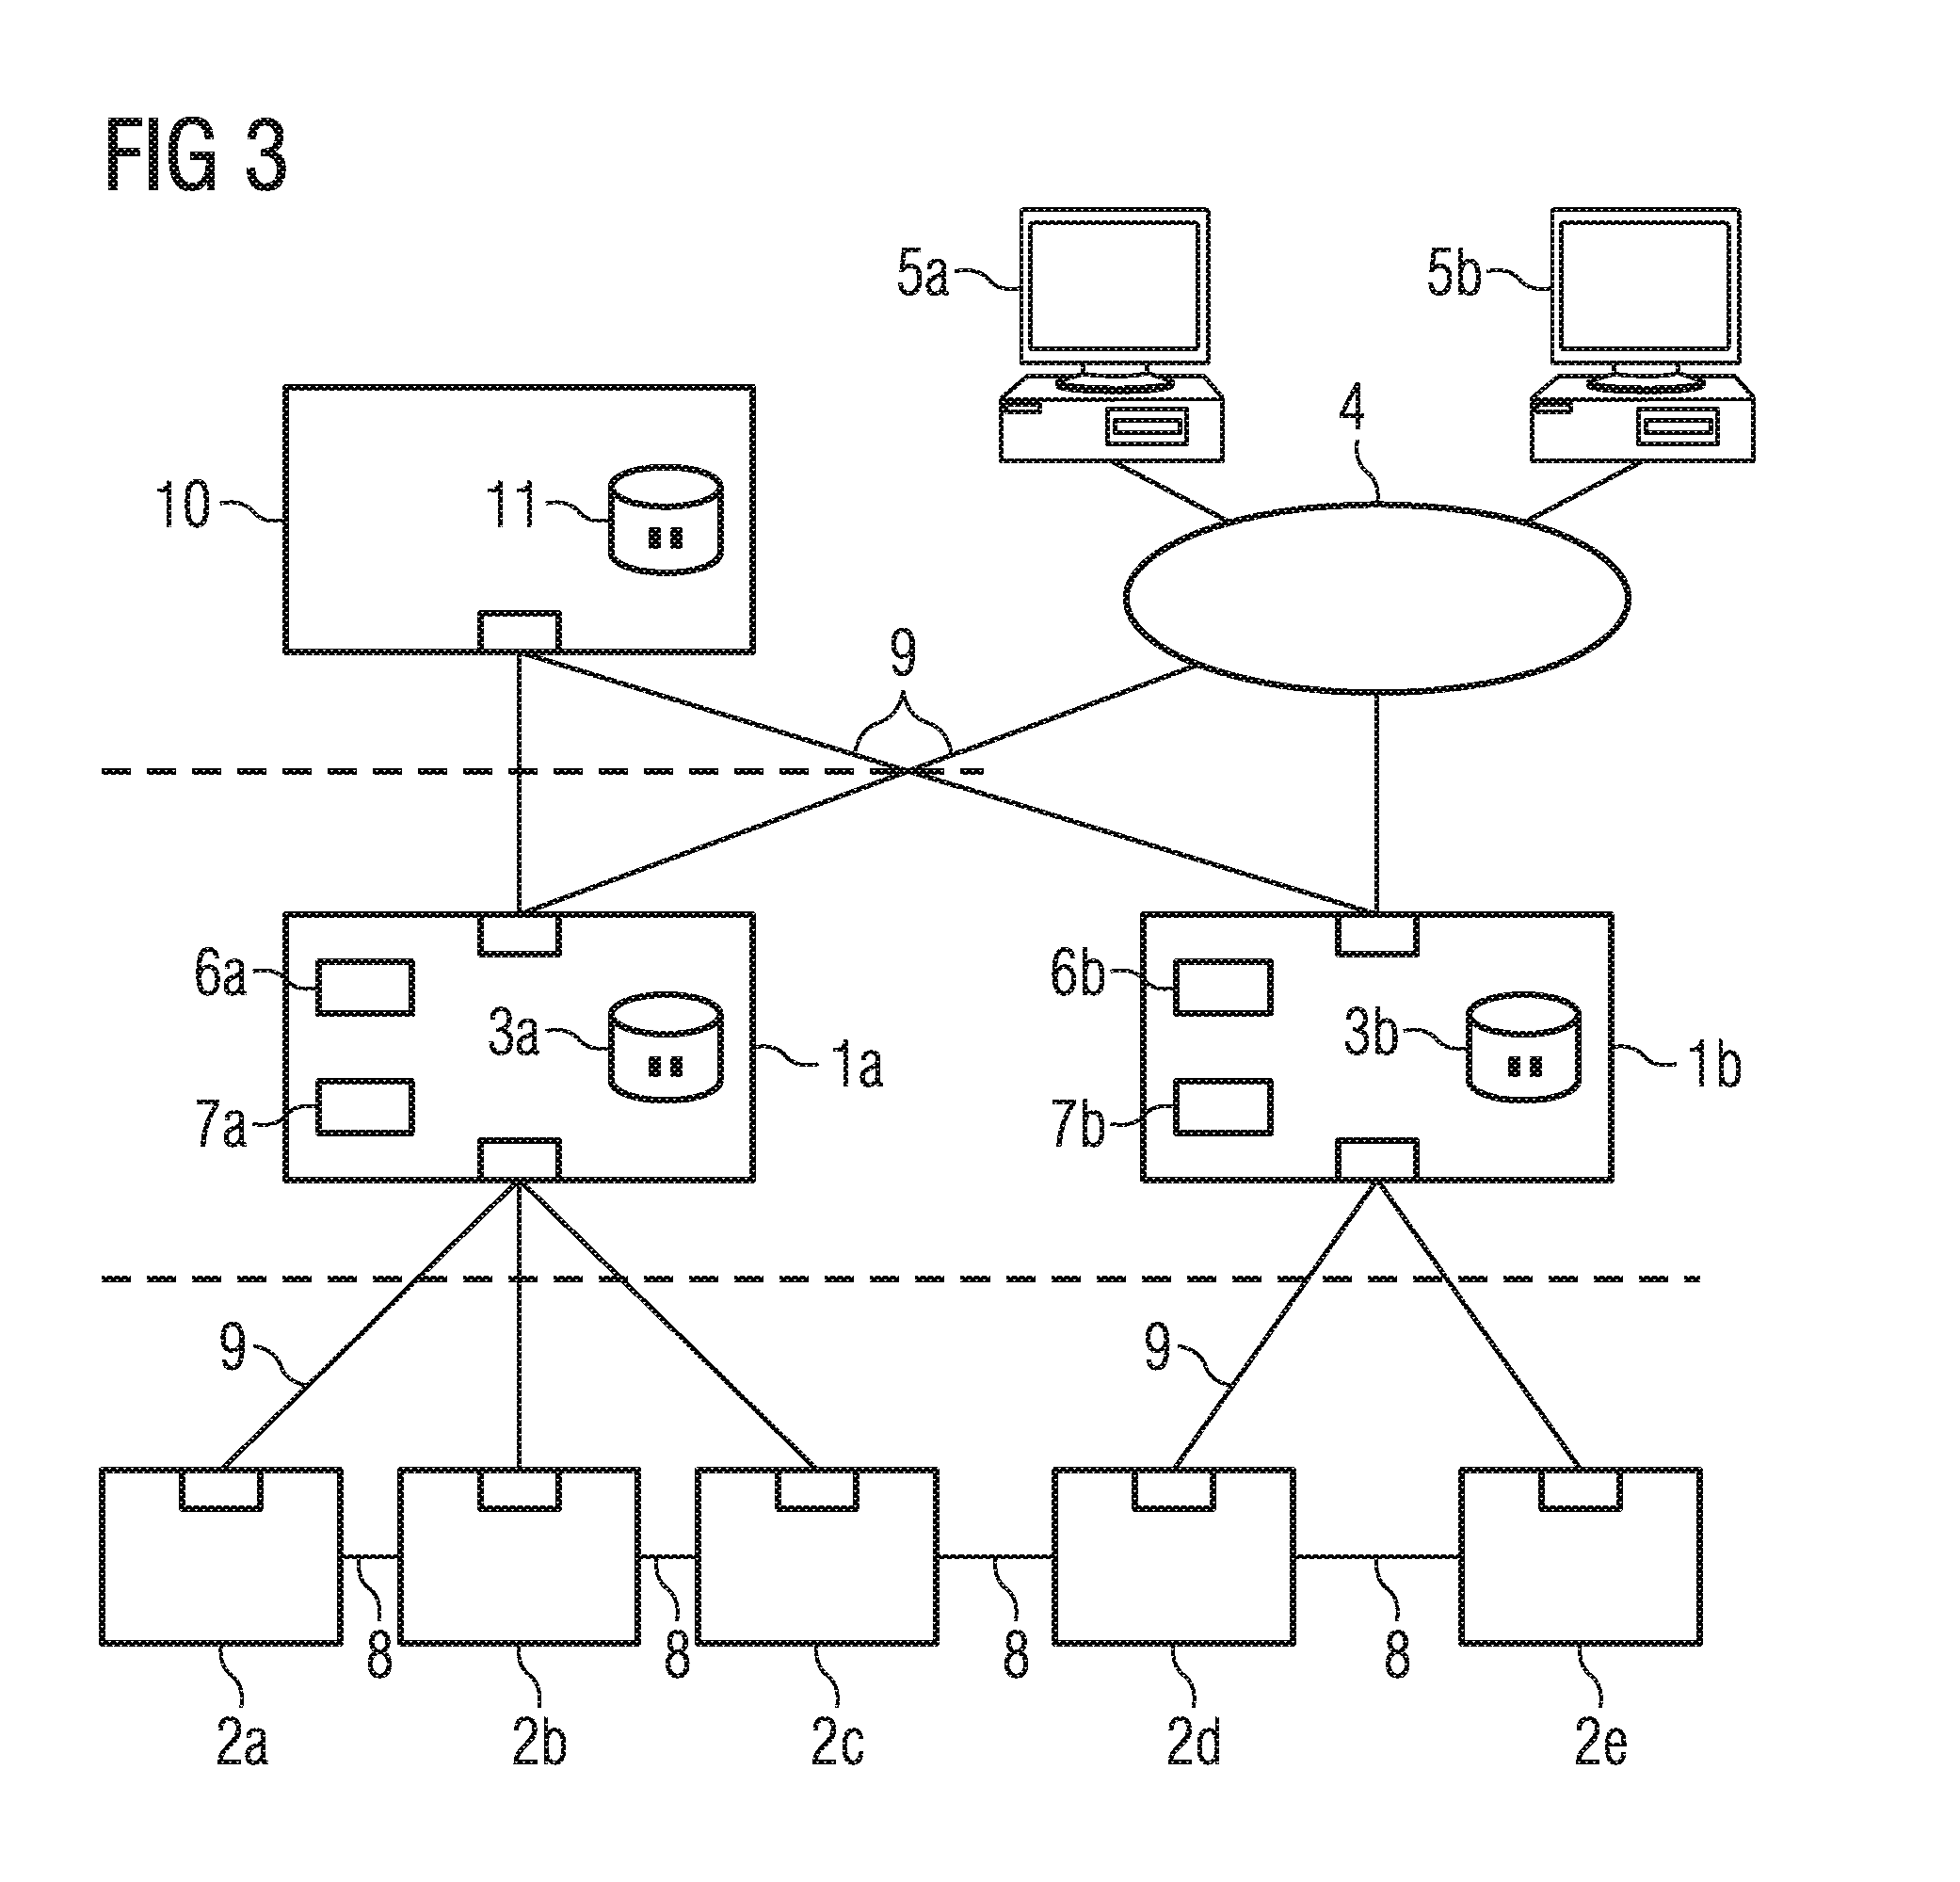 Fluid storage management system and method for monitoring fluid capacities and for controlling the transfer of fluid capacities within a fluid network